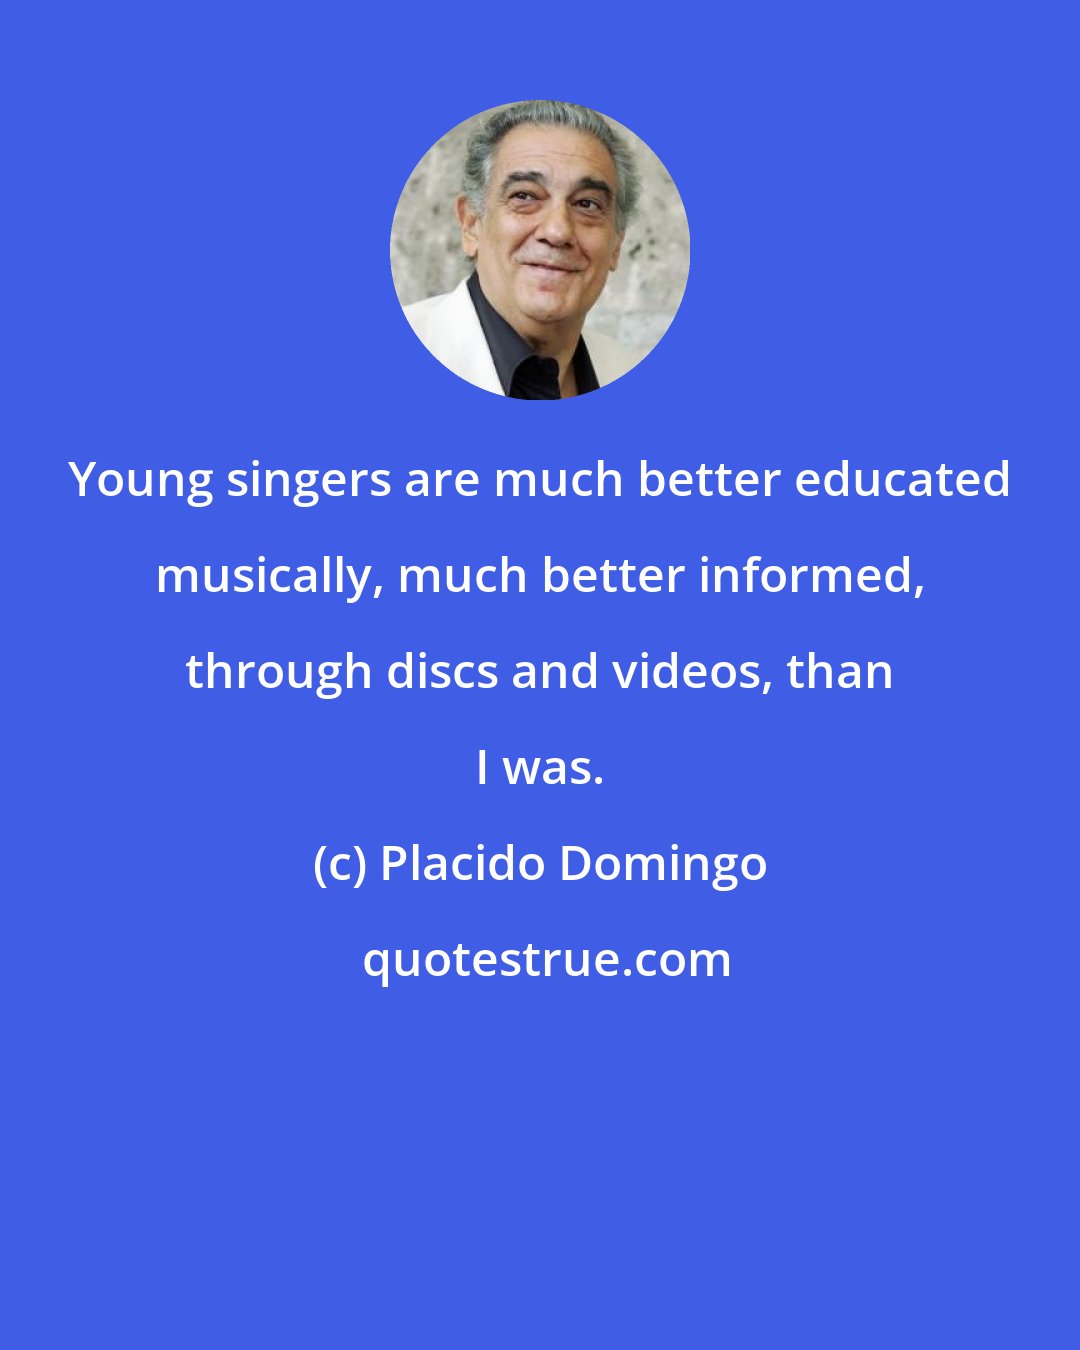 Placido Domingo: Young singers are much better educated musically, much better informed, through discs and videos, than I was.